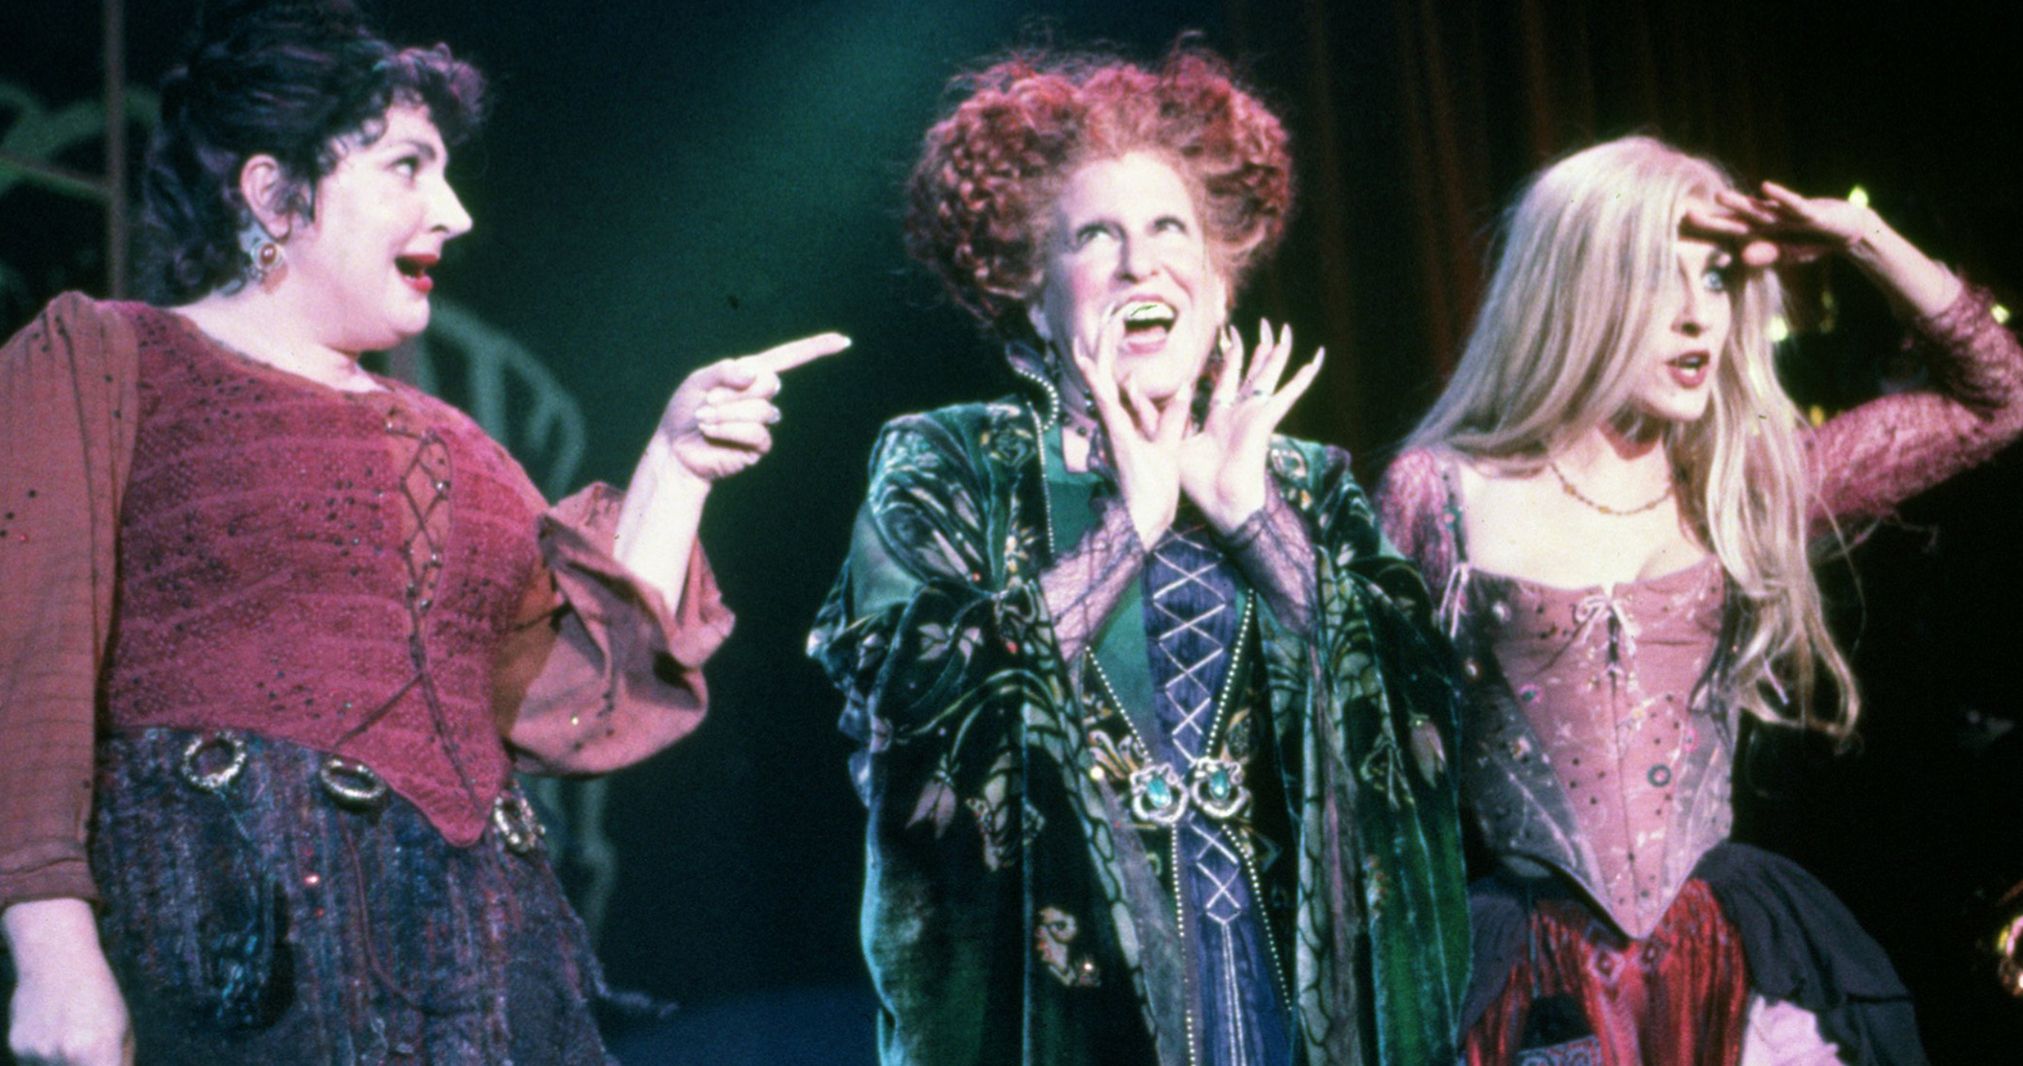 Hocus Pocus 2 Pitch Was Pretty Great Teases Bette Midler